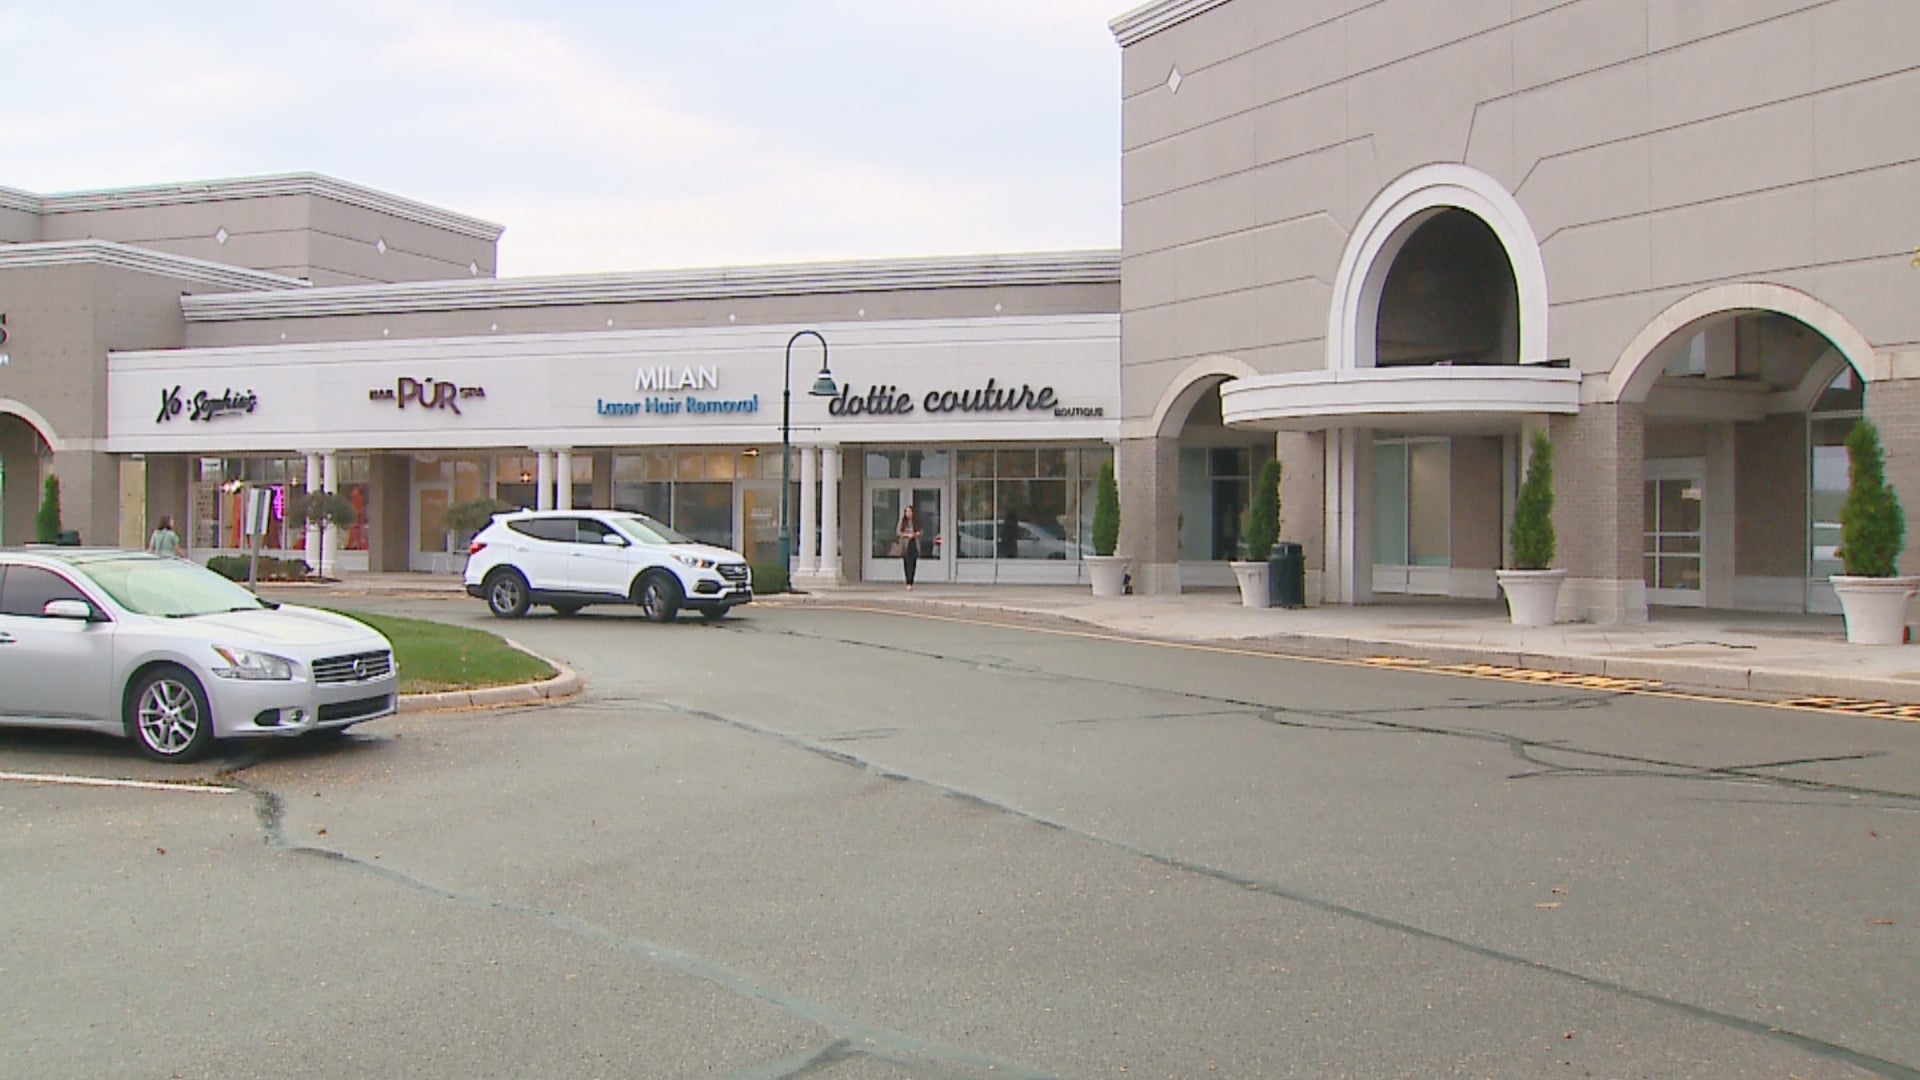 Dottie Couture customers 'scammed'; retailer closes after gift card sale